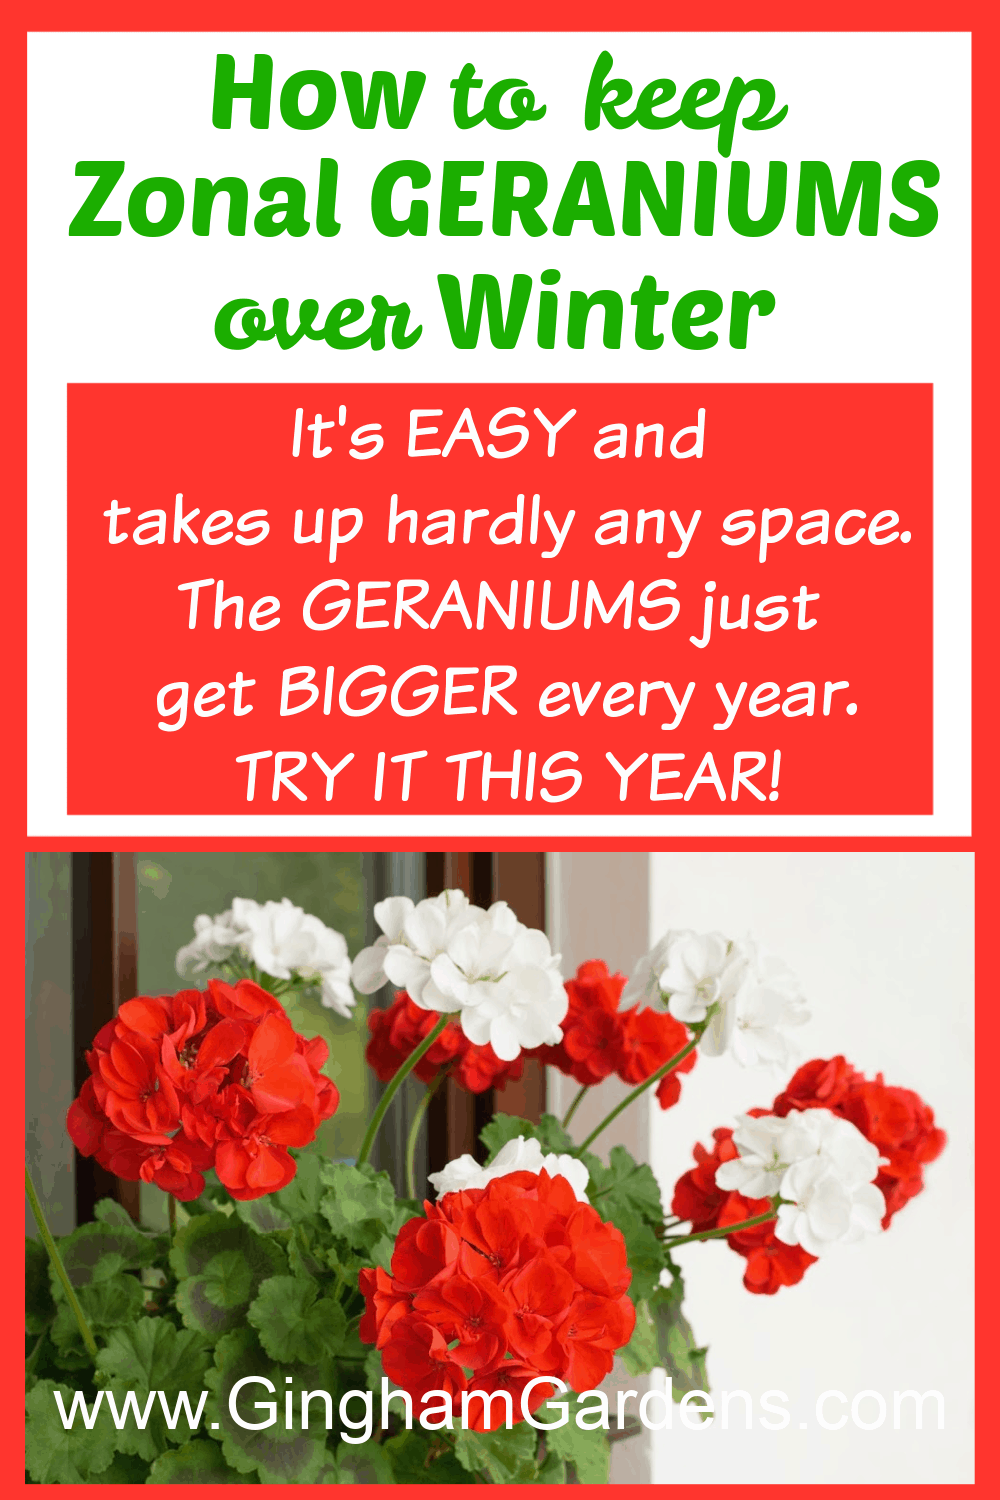 Image of Geraniums with text overlay - How to keep Zonal Geraniums over winter